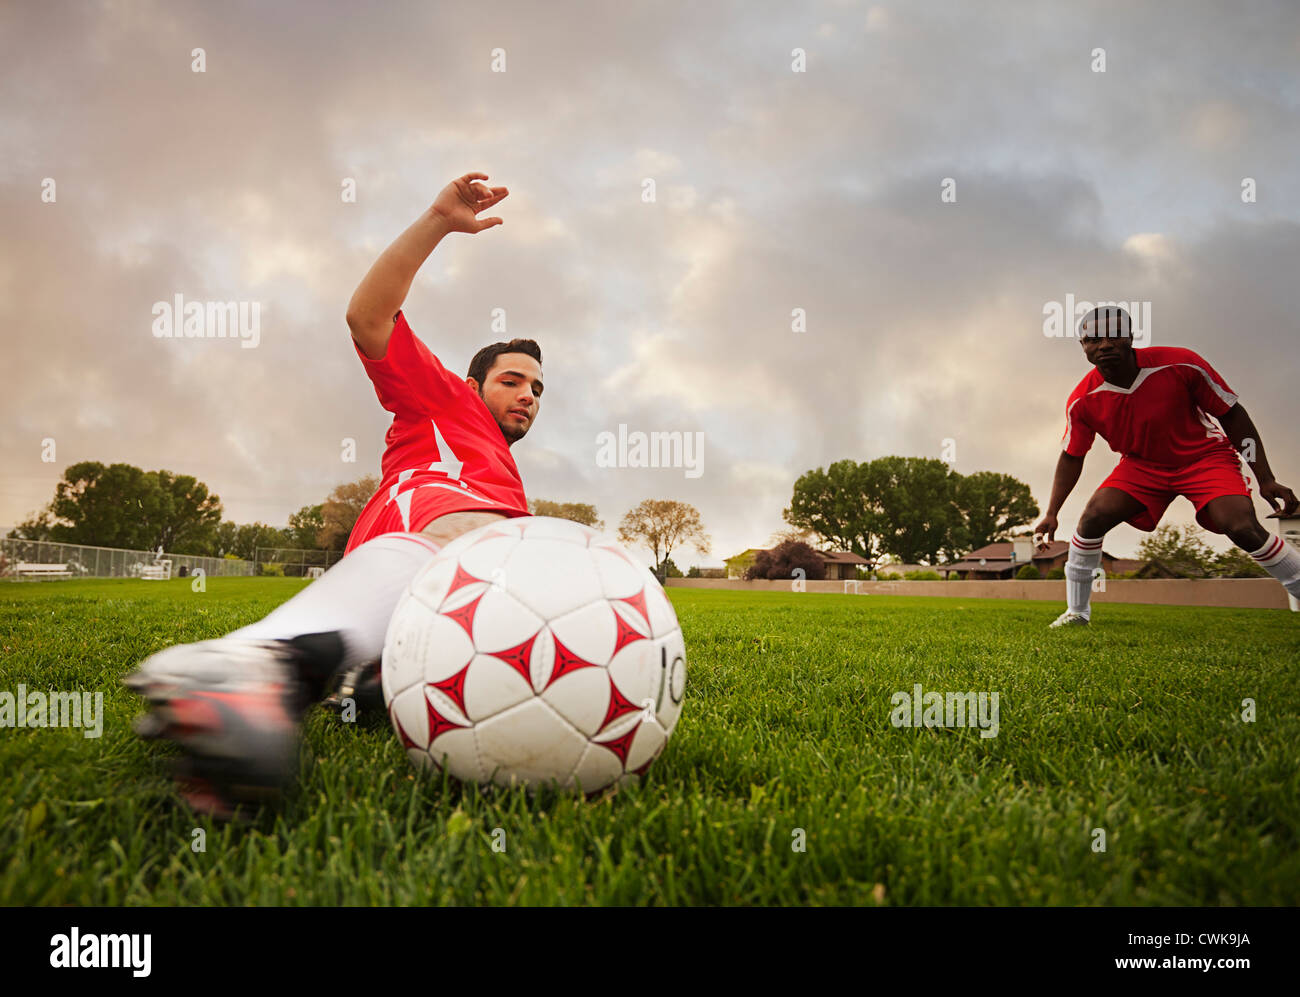 Hispanic soccer player Kicking the ball Banque D'Images